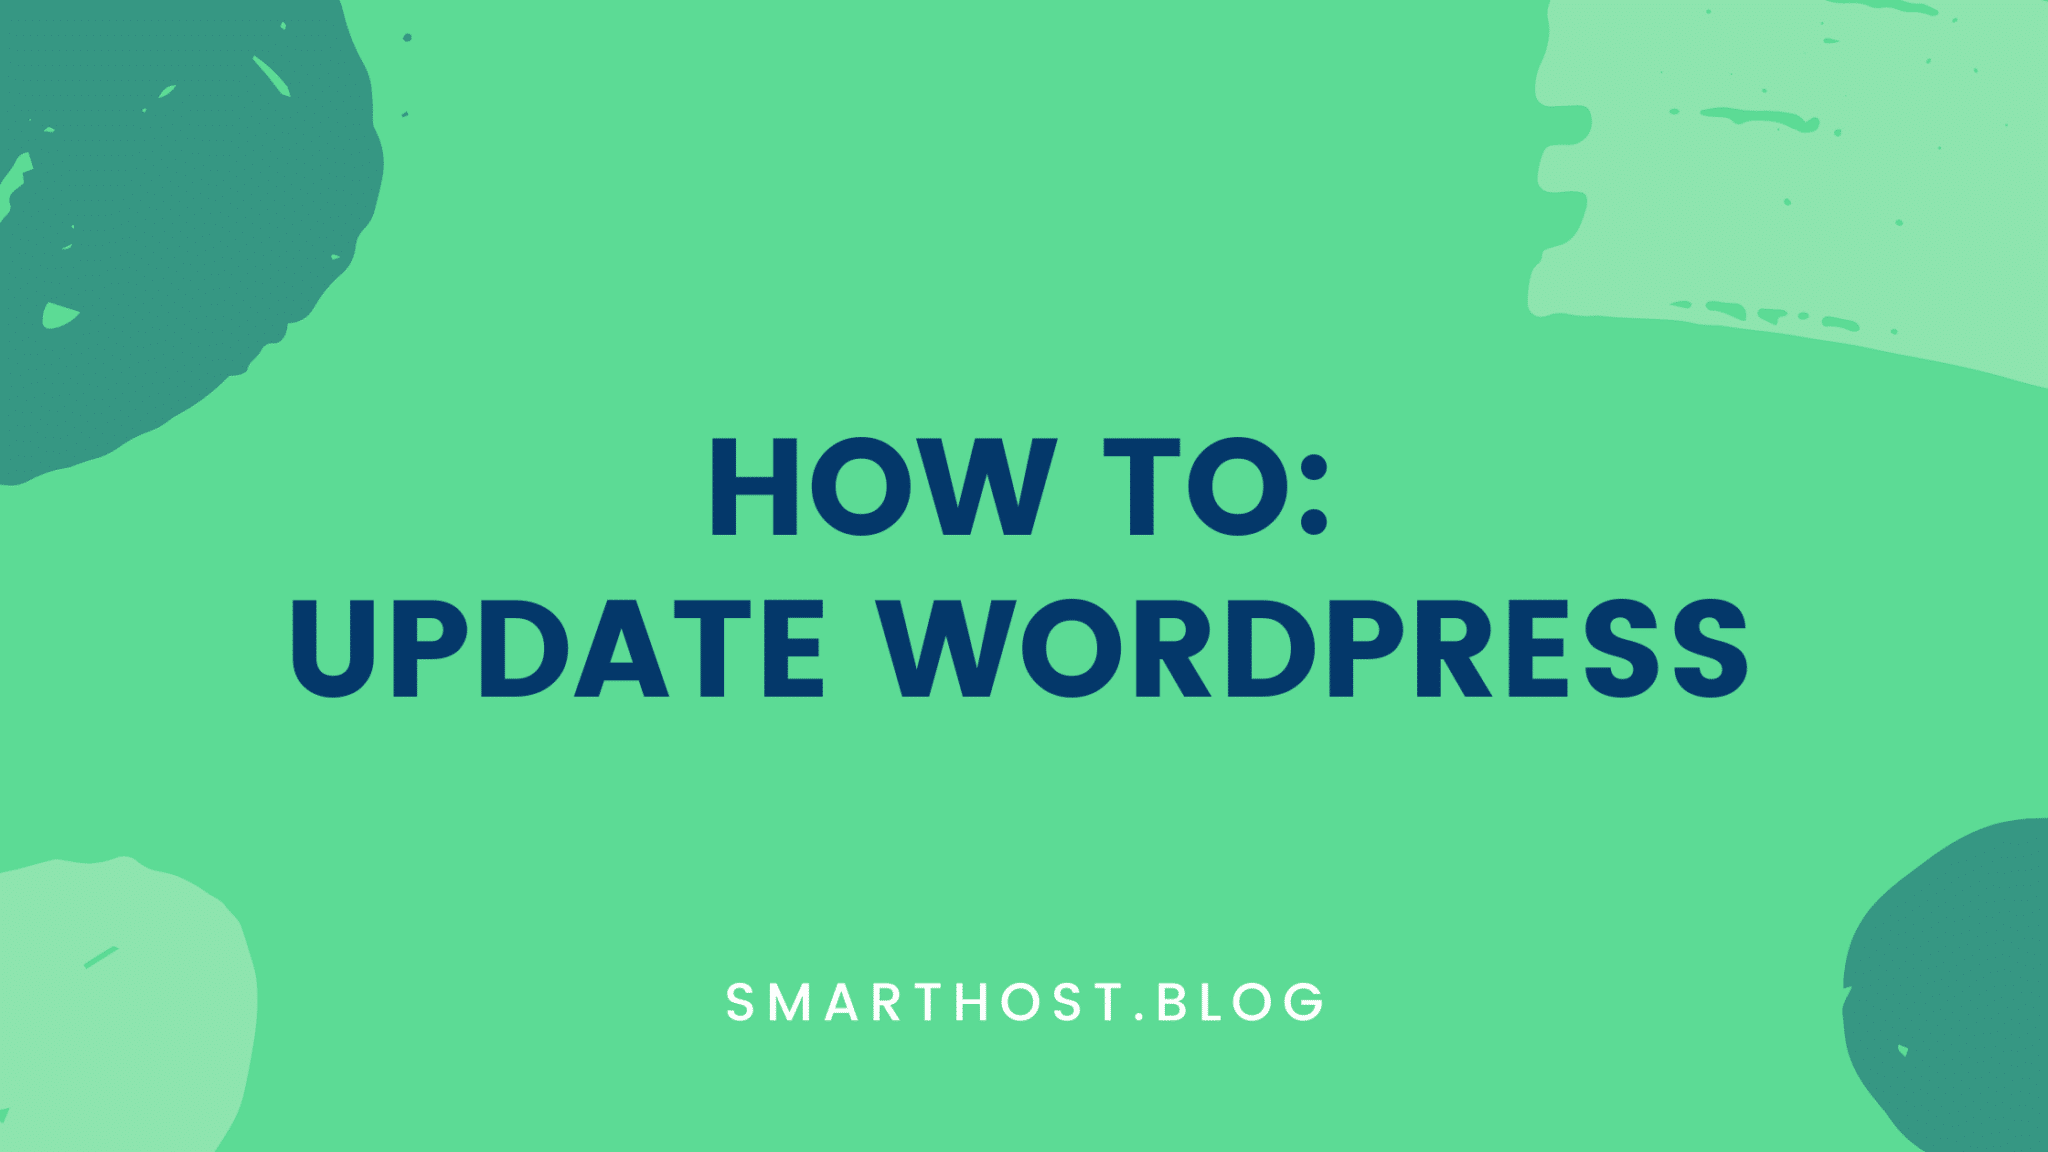 The image is showing instructions on how to update a WordPress website using a Smarthost blog.